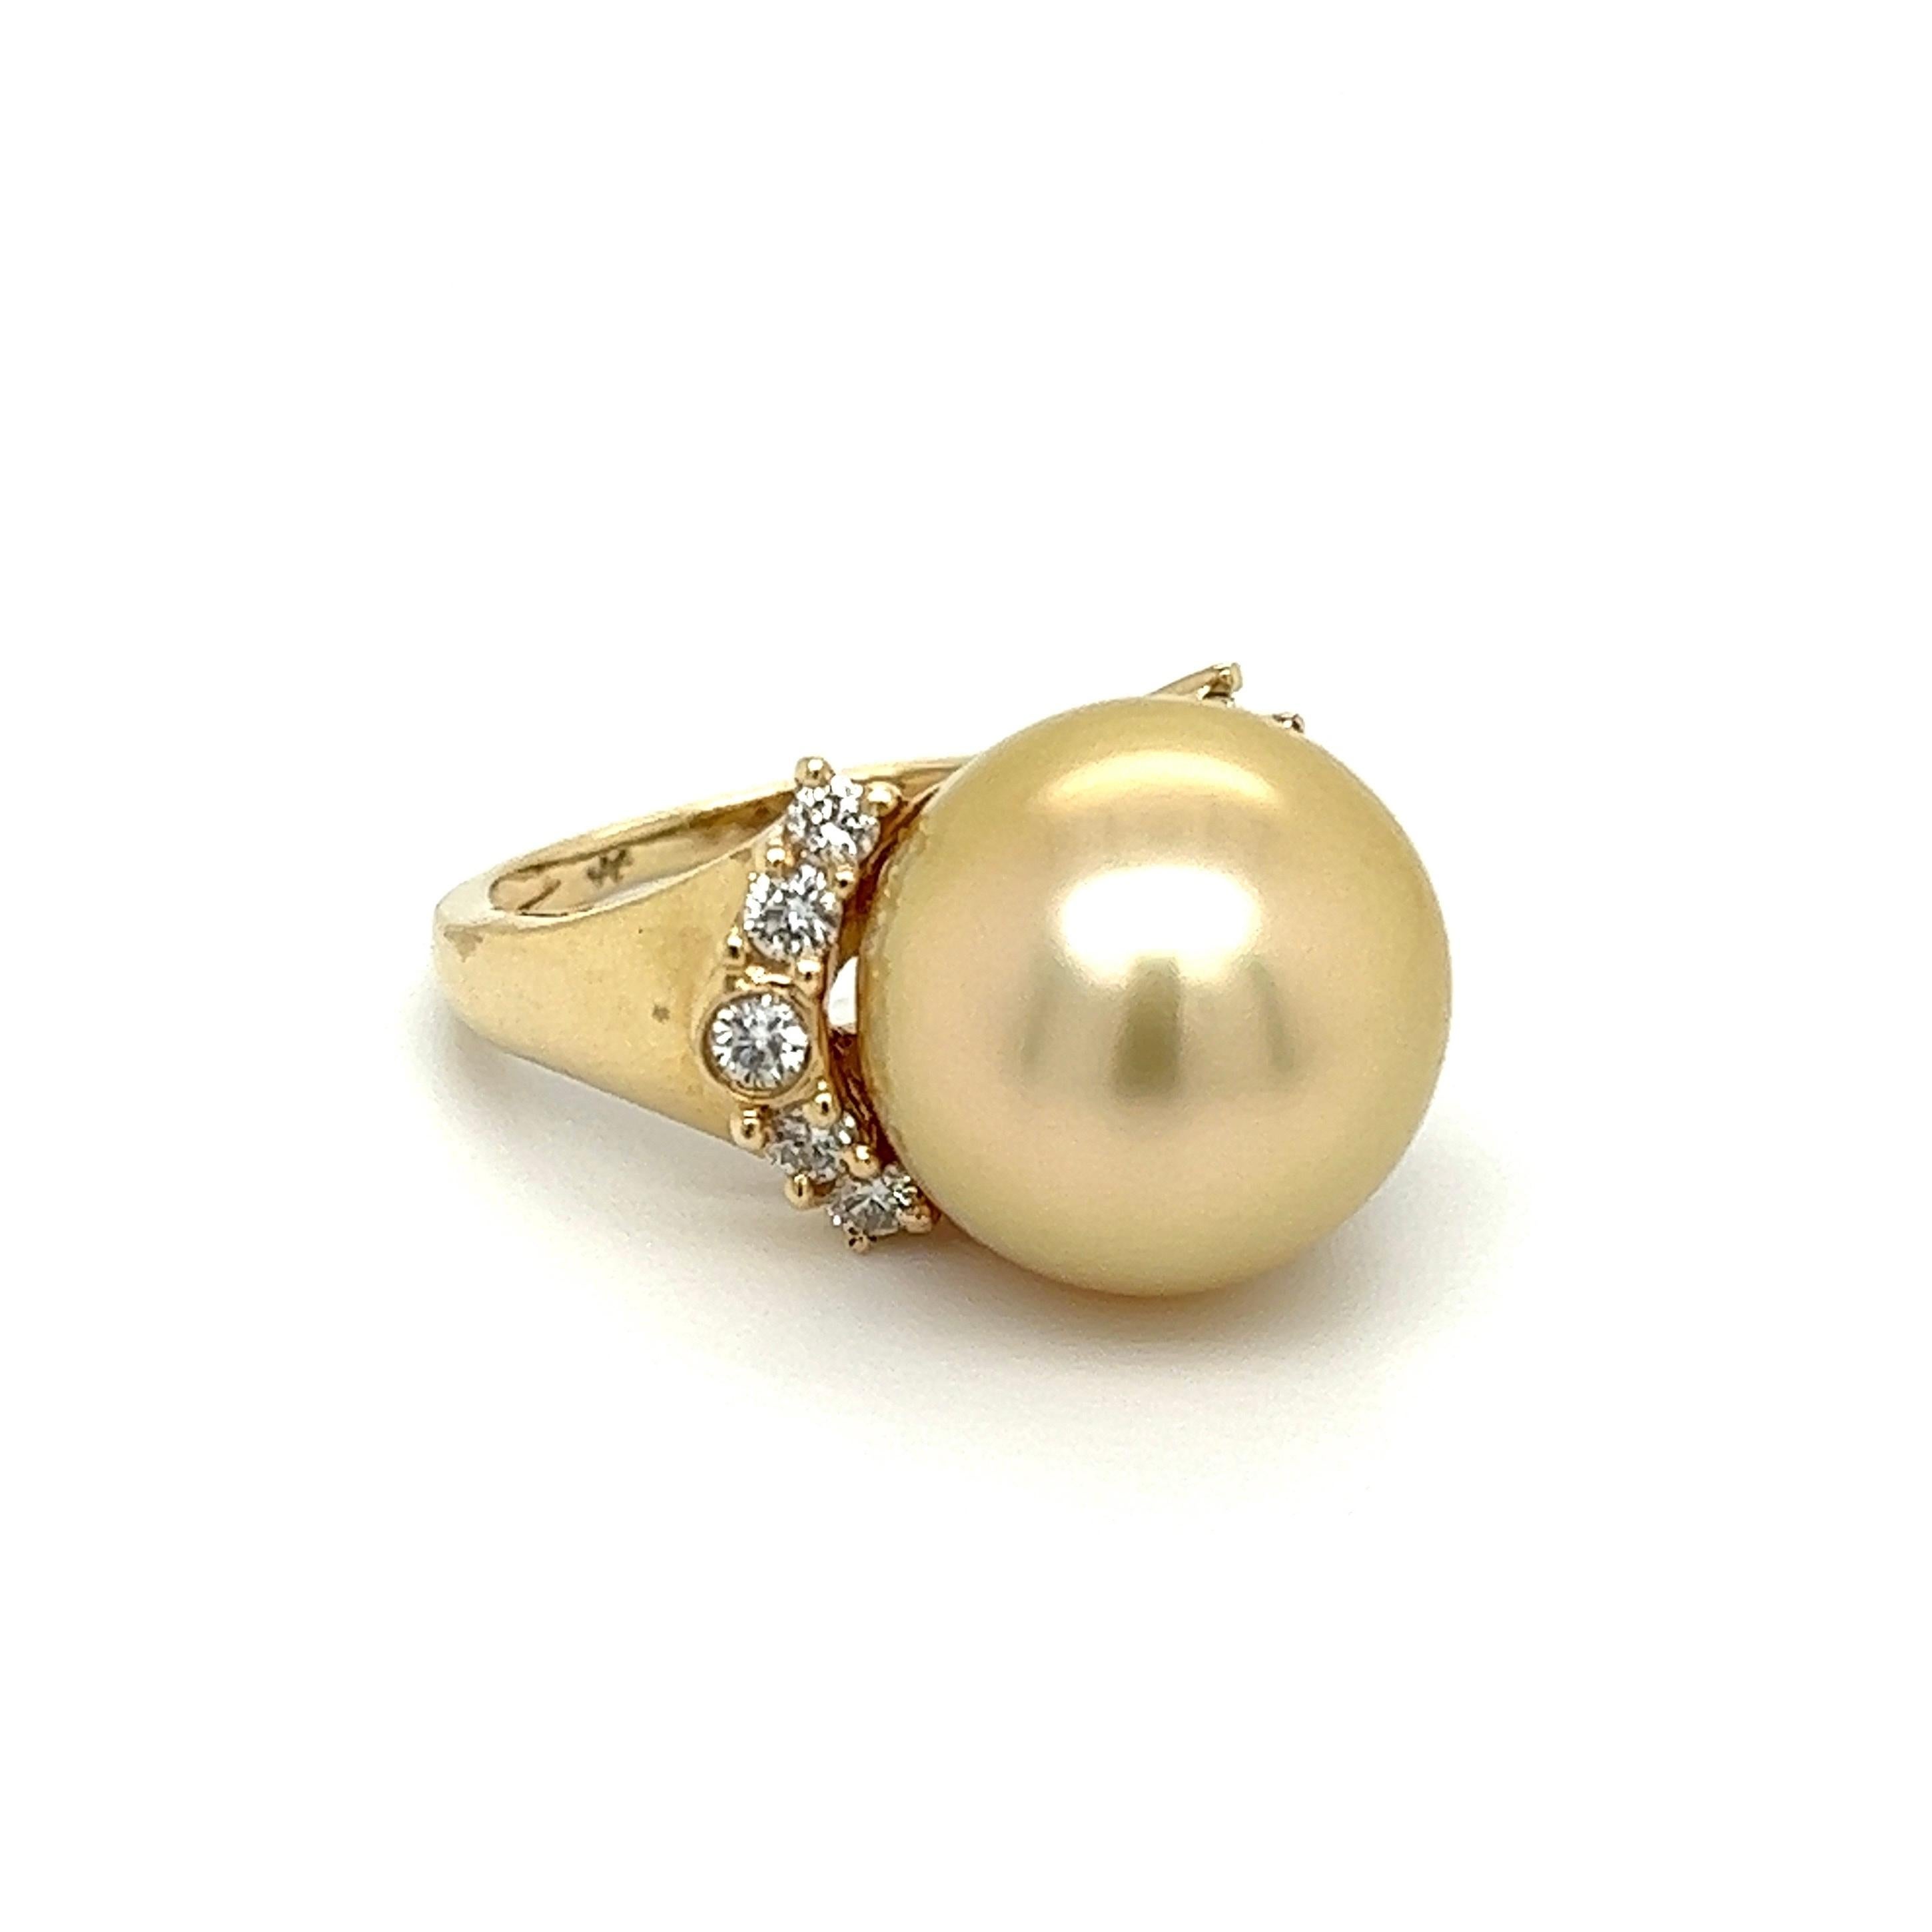 Simply Beautiful! Finely detailed Golden South Sea Pearl and Diamond Cocktail Ring. Centering a securely nestled Hand set 12.5mm South Sea Pearl, enhanced with Hand set Diamonds, weighing approx. 0.30 total carat weight. Dimensions 1.16” l x 0.75” w